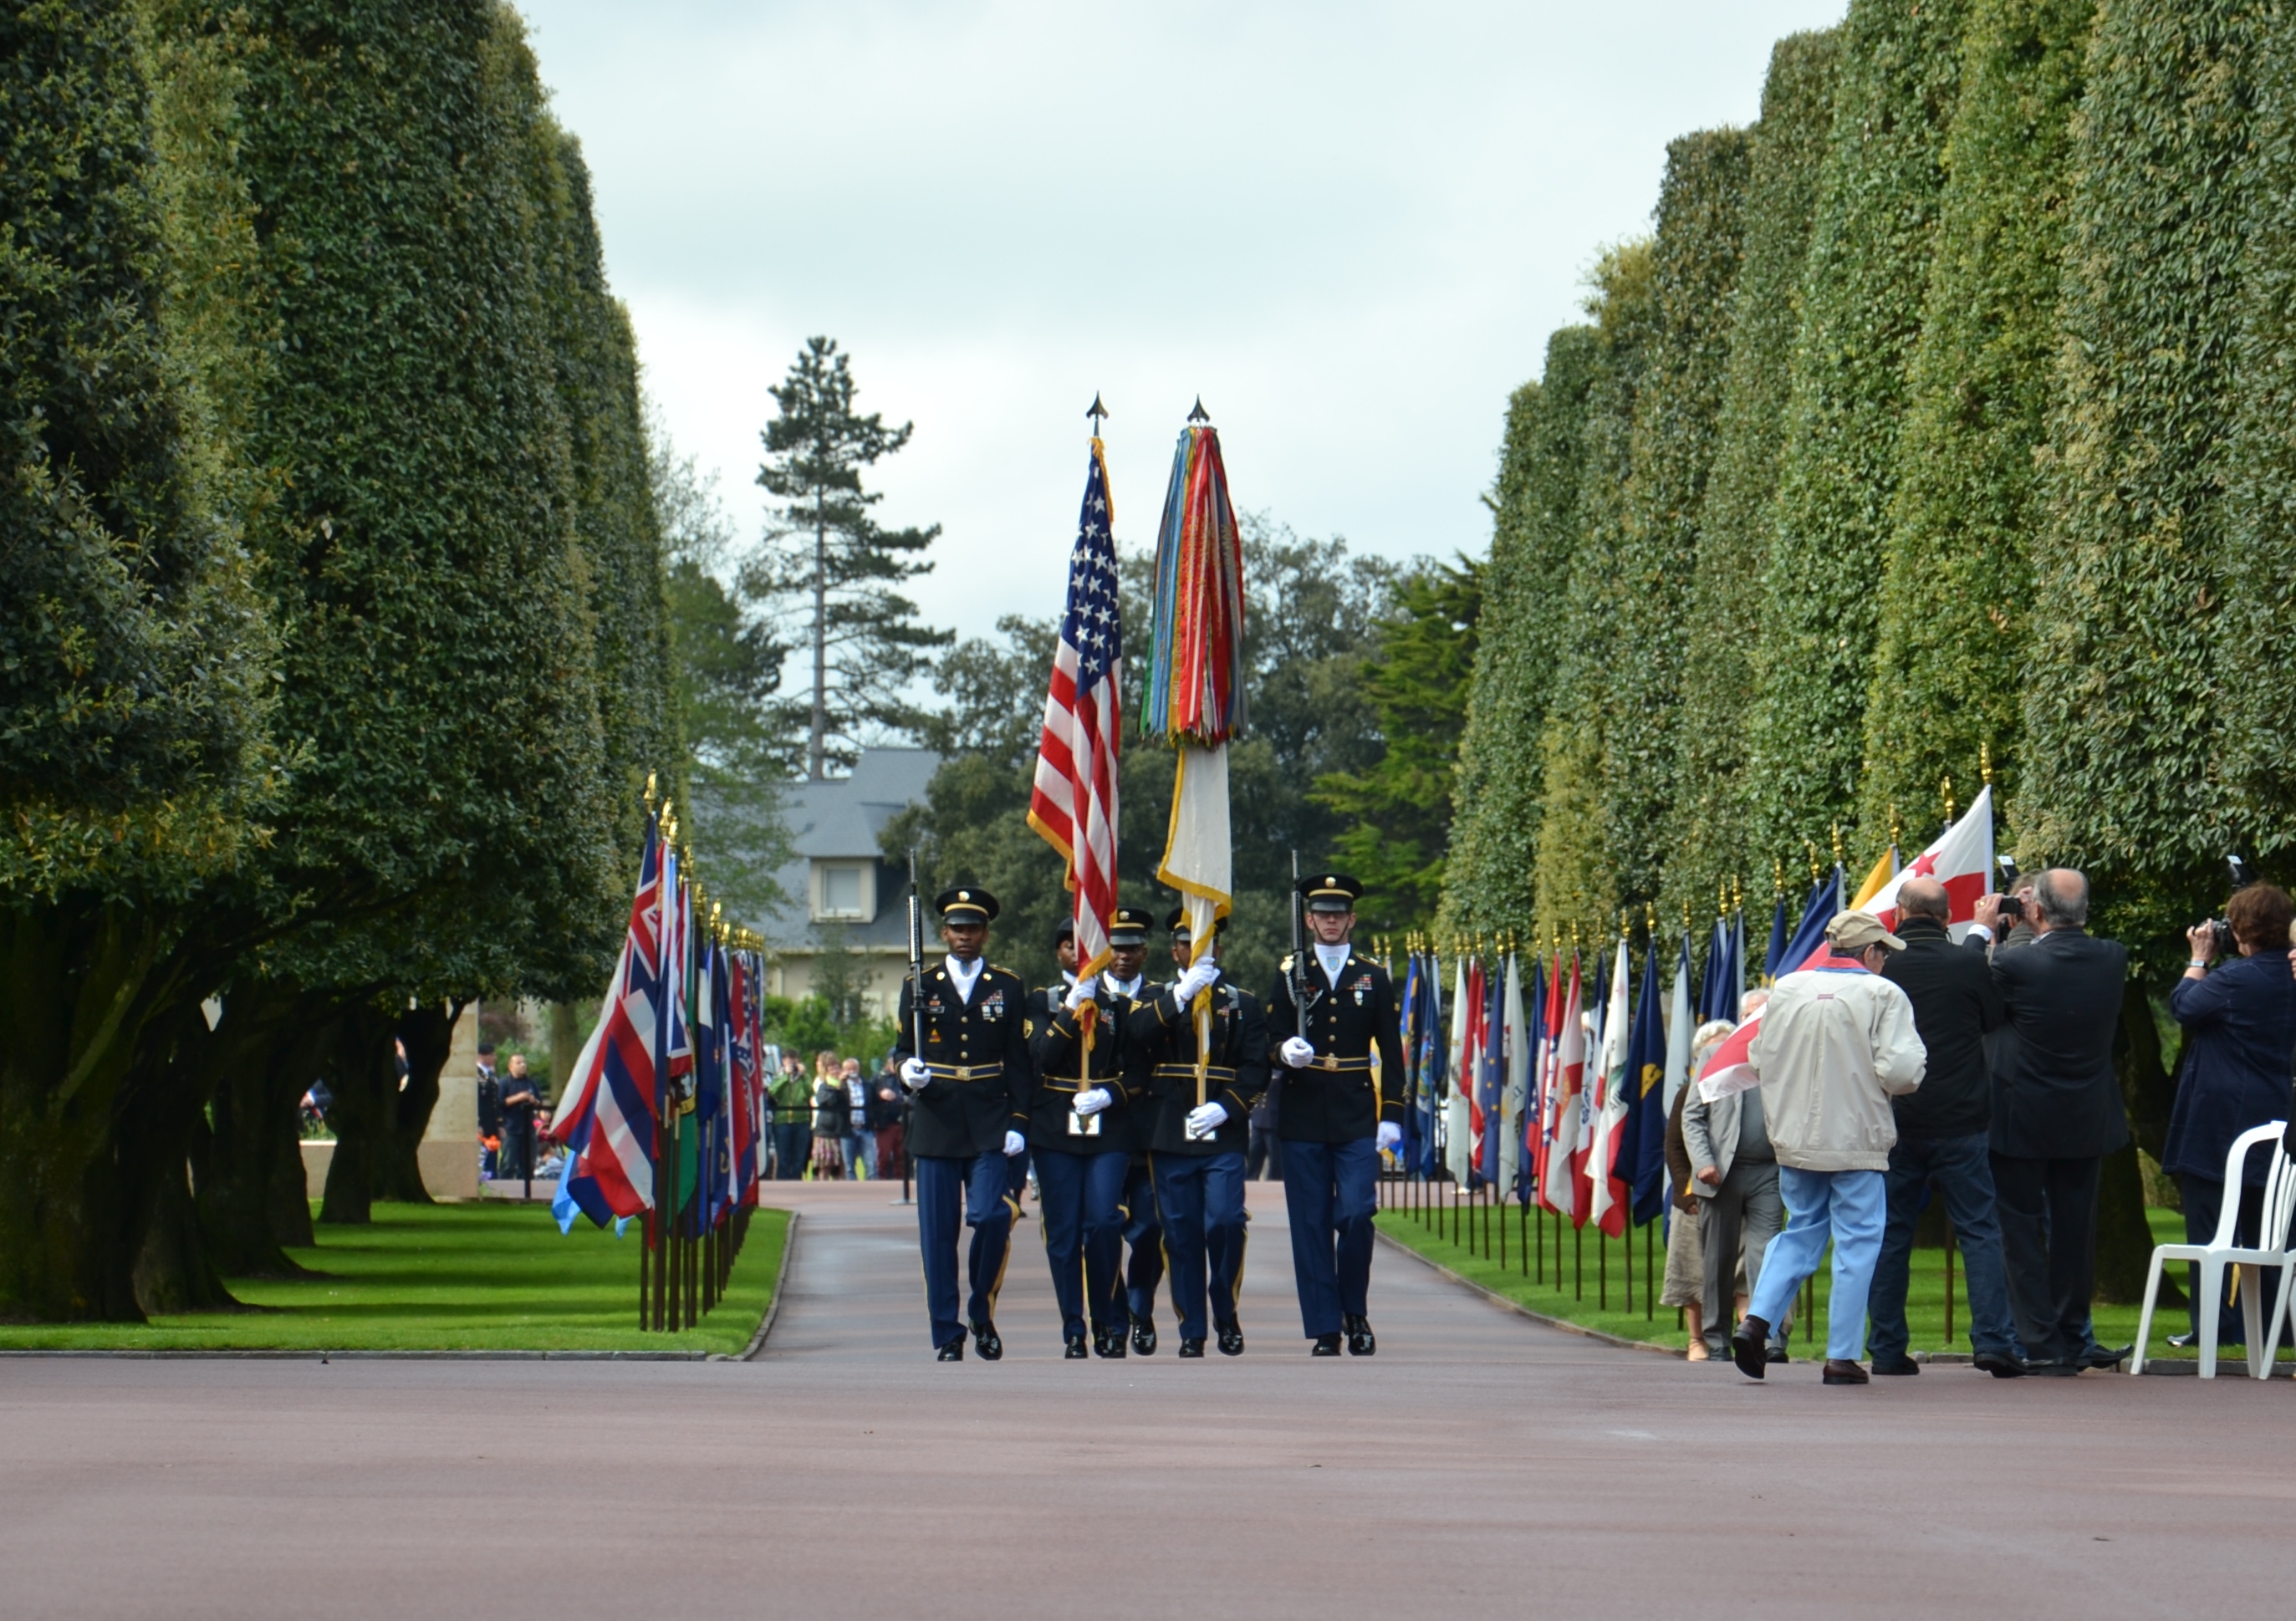 Participants in the 2012 Memorial Day ceremony at Normandy American Cemetery.